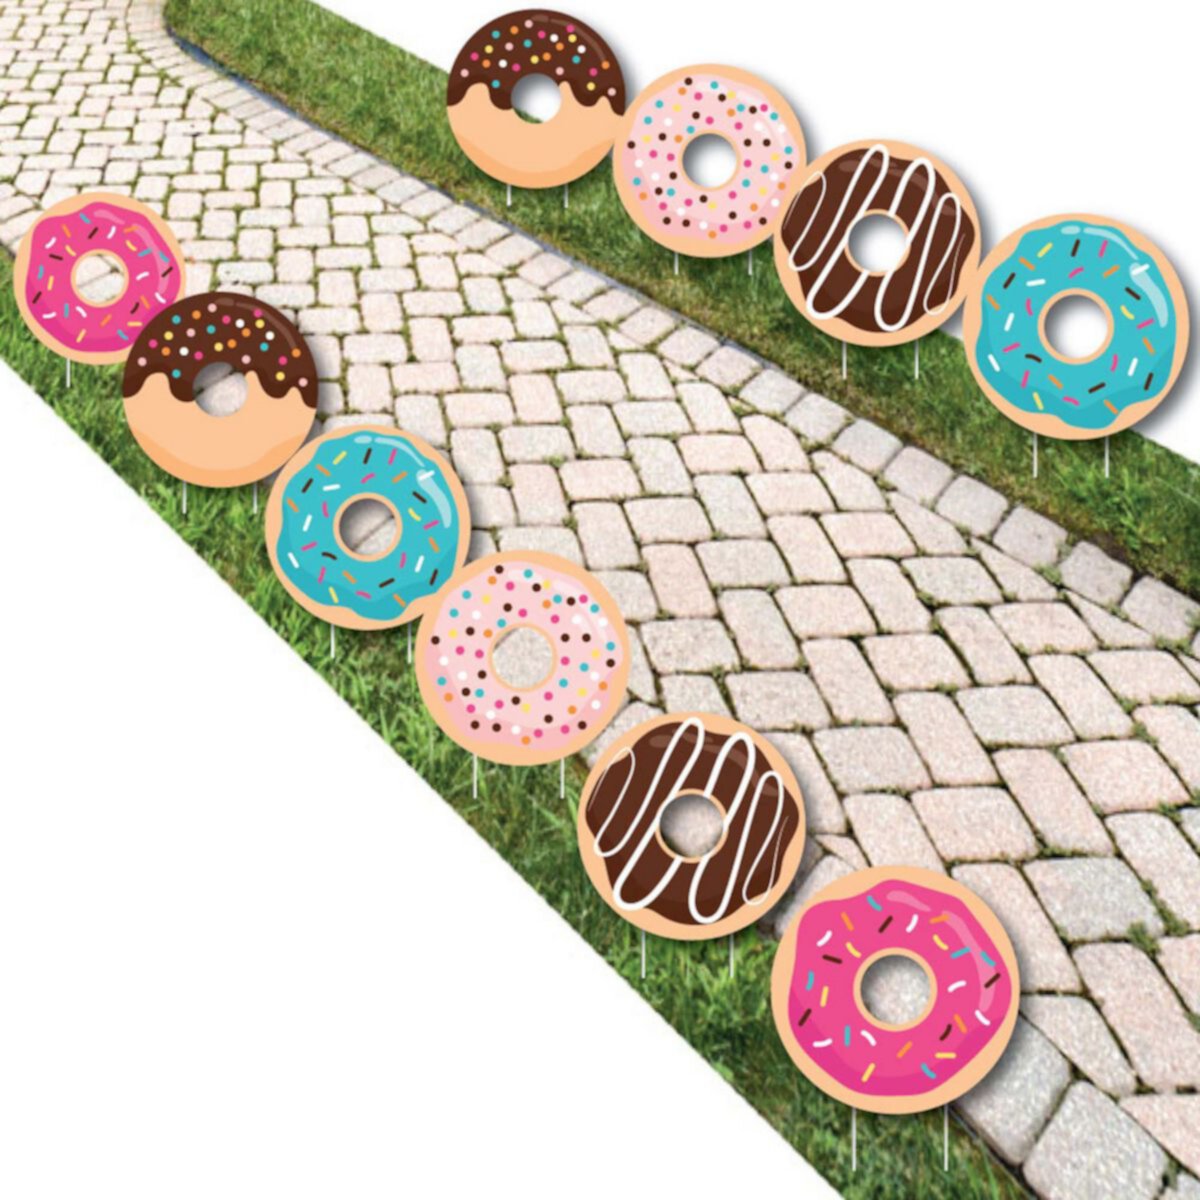 Big Dot of Happiness Donut Worry, Let's Party - Lawn Outdoor Doughnut Party Yard Decor 10 Pc Big Dot of Happiness